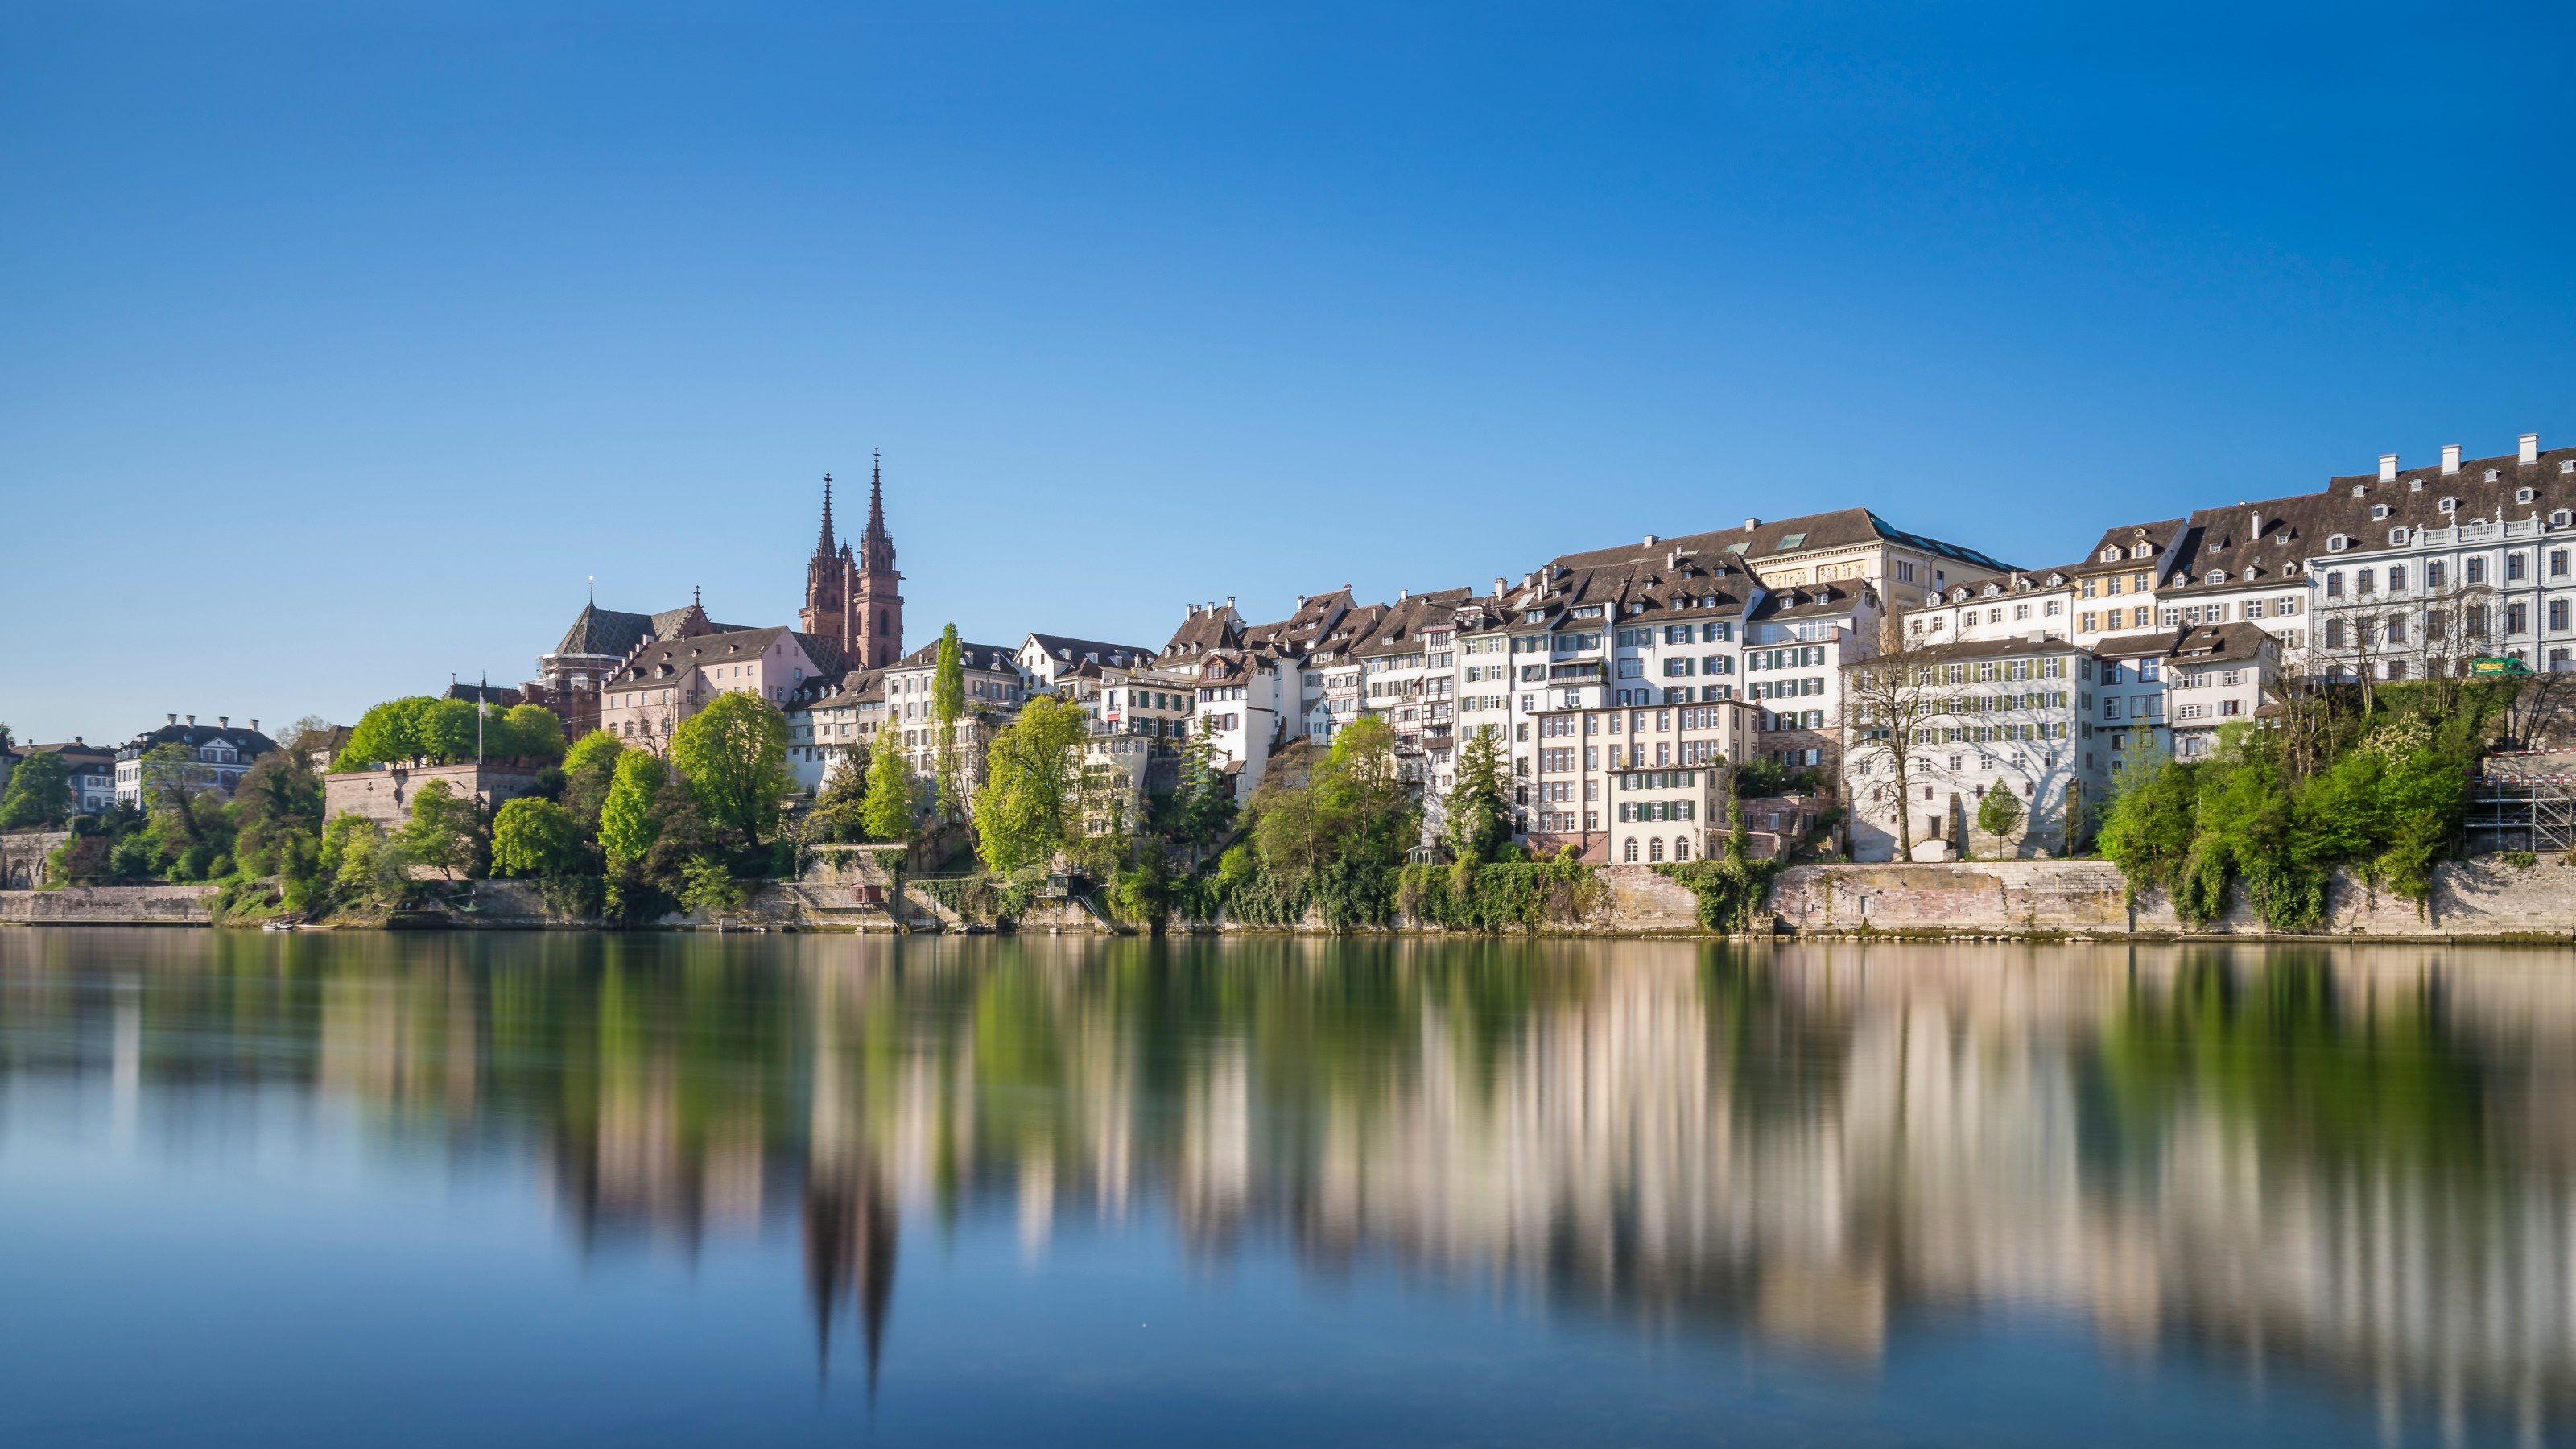 Basel Is A City On The Rhine River In Northwest Switzerland